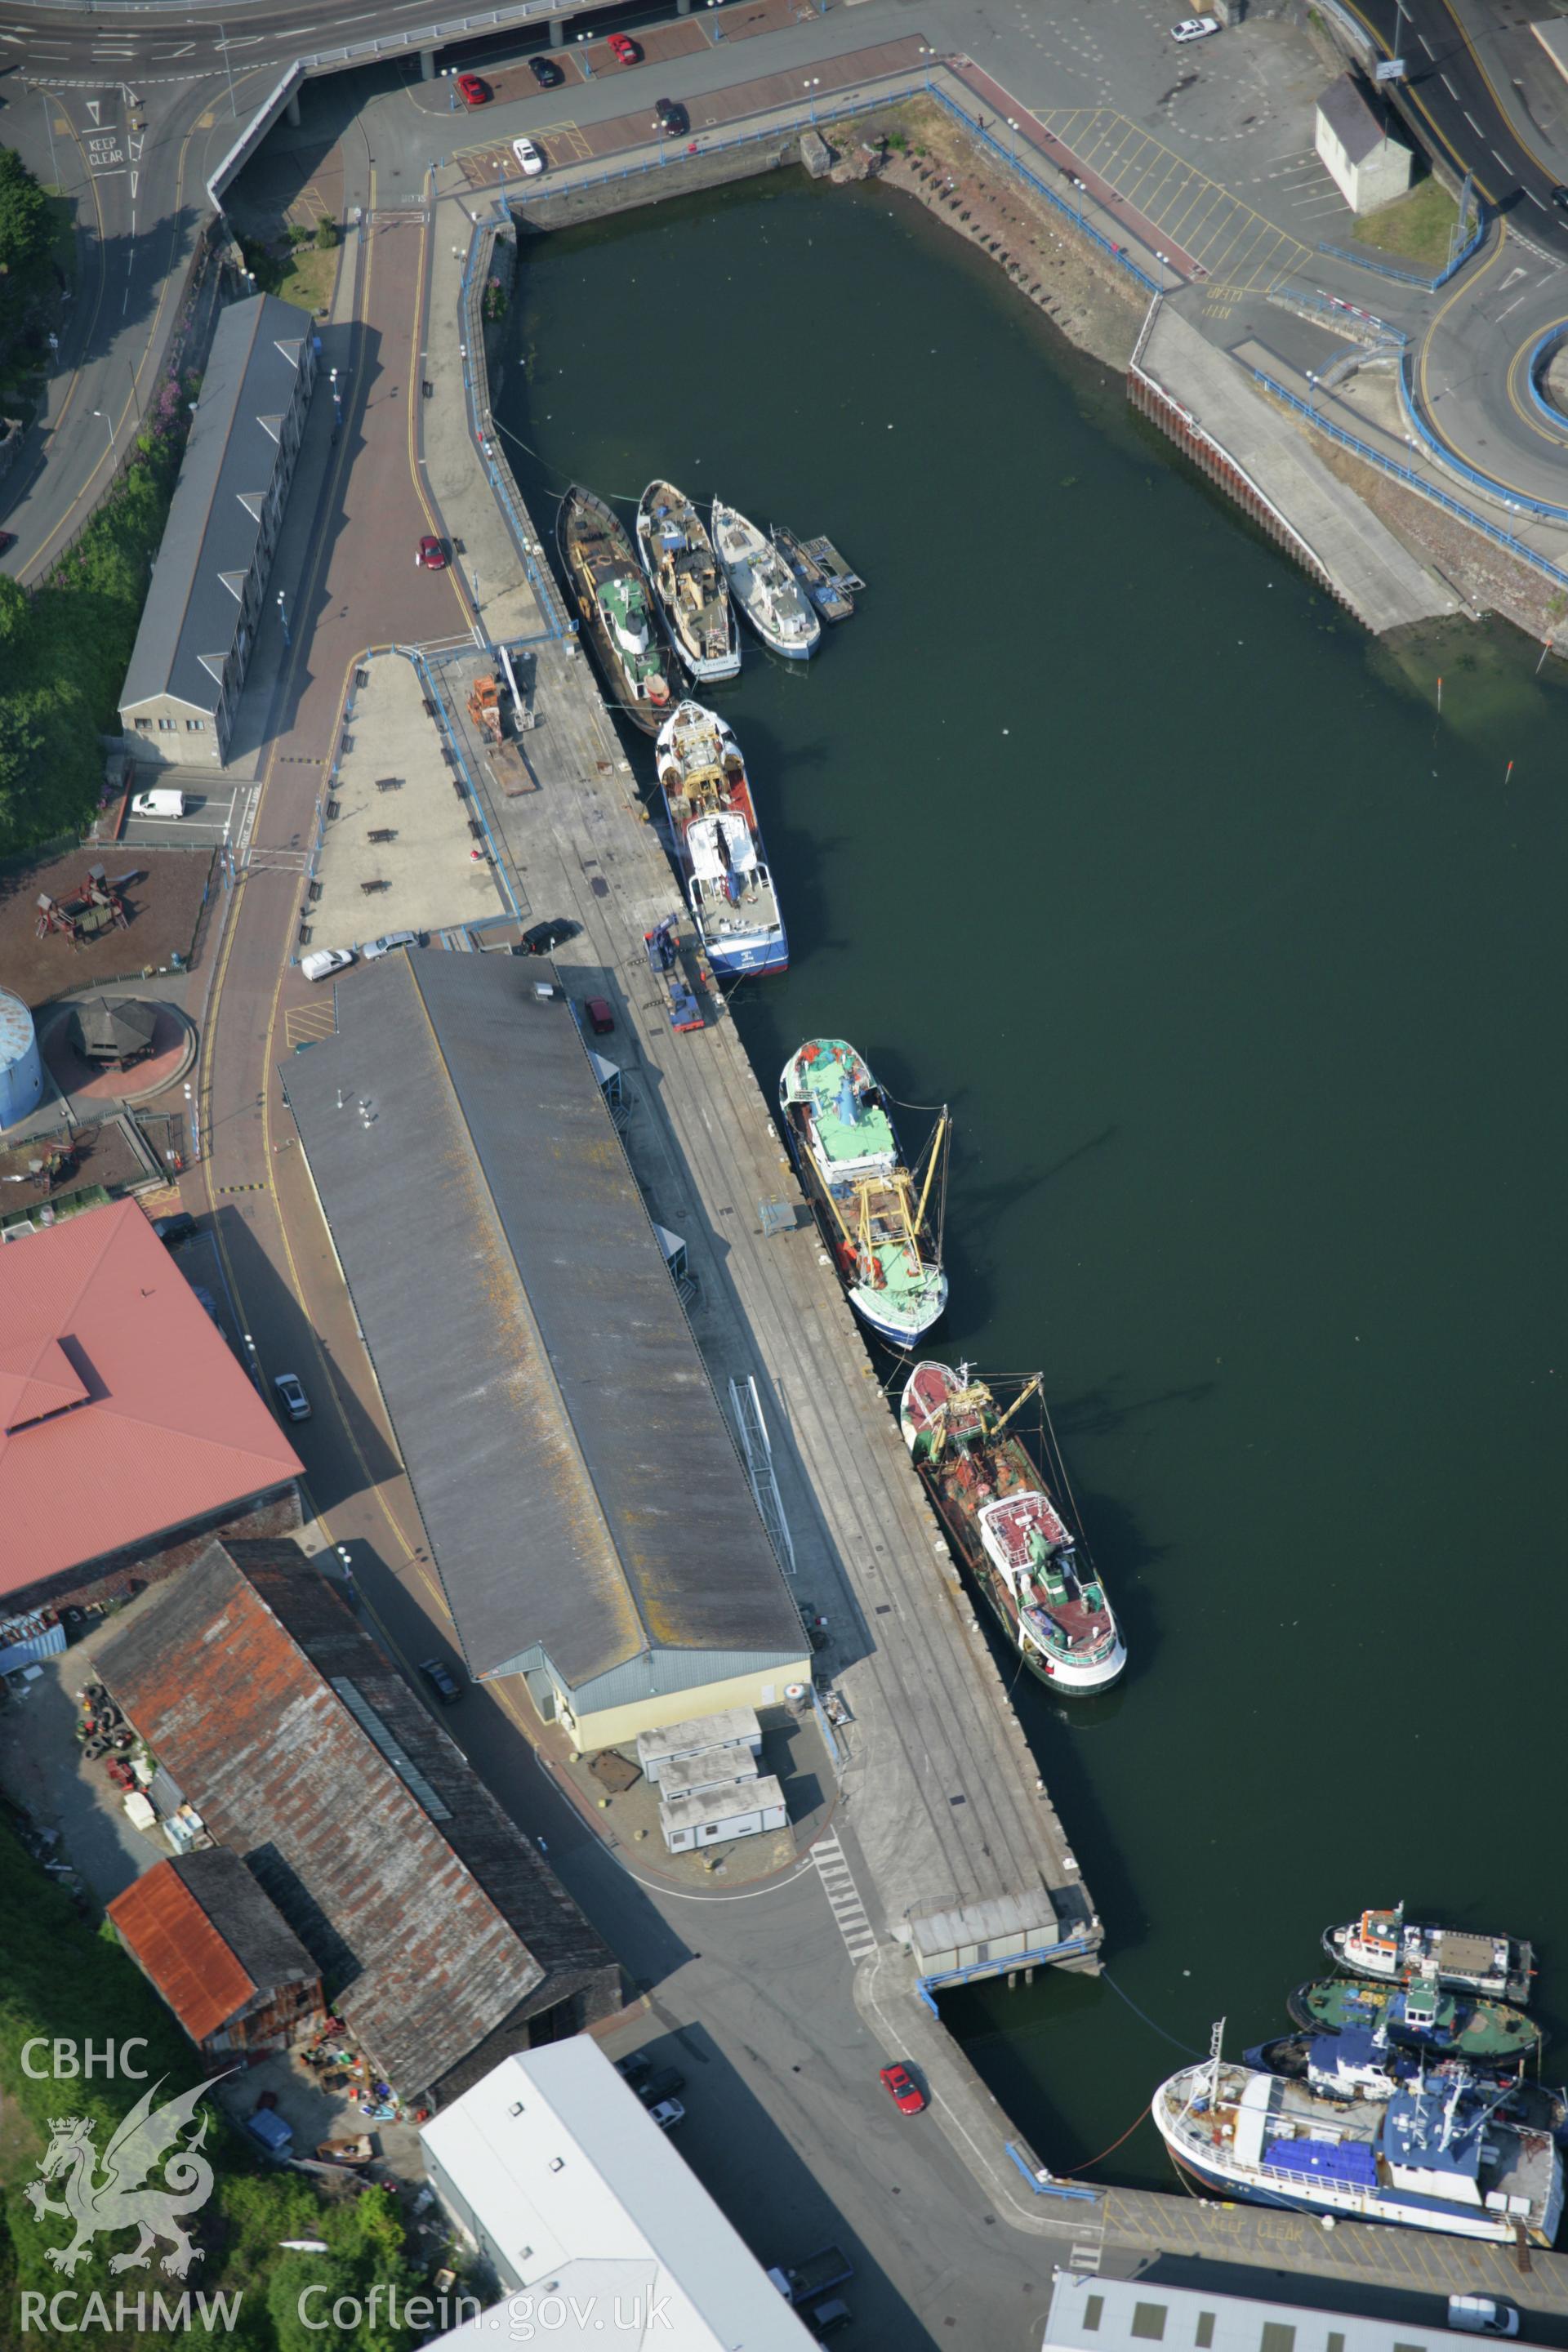 RCAHMW colour oblique aerial photograph of Milford Haven Dockyard, viewed from the south. Taken on 08 June 2006 by Toby Driver.